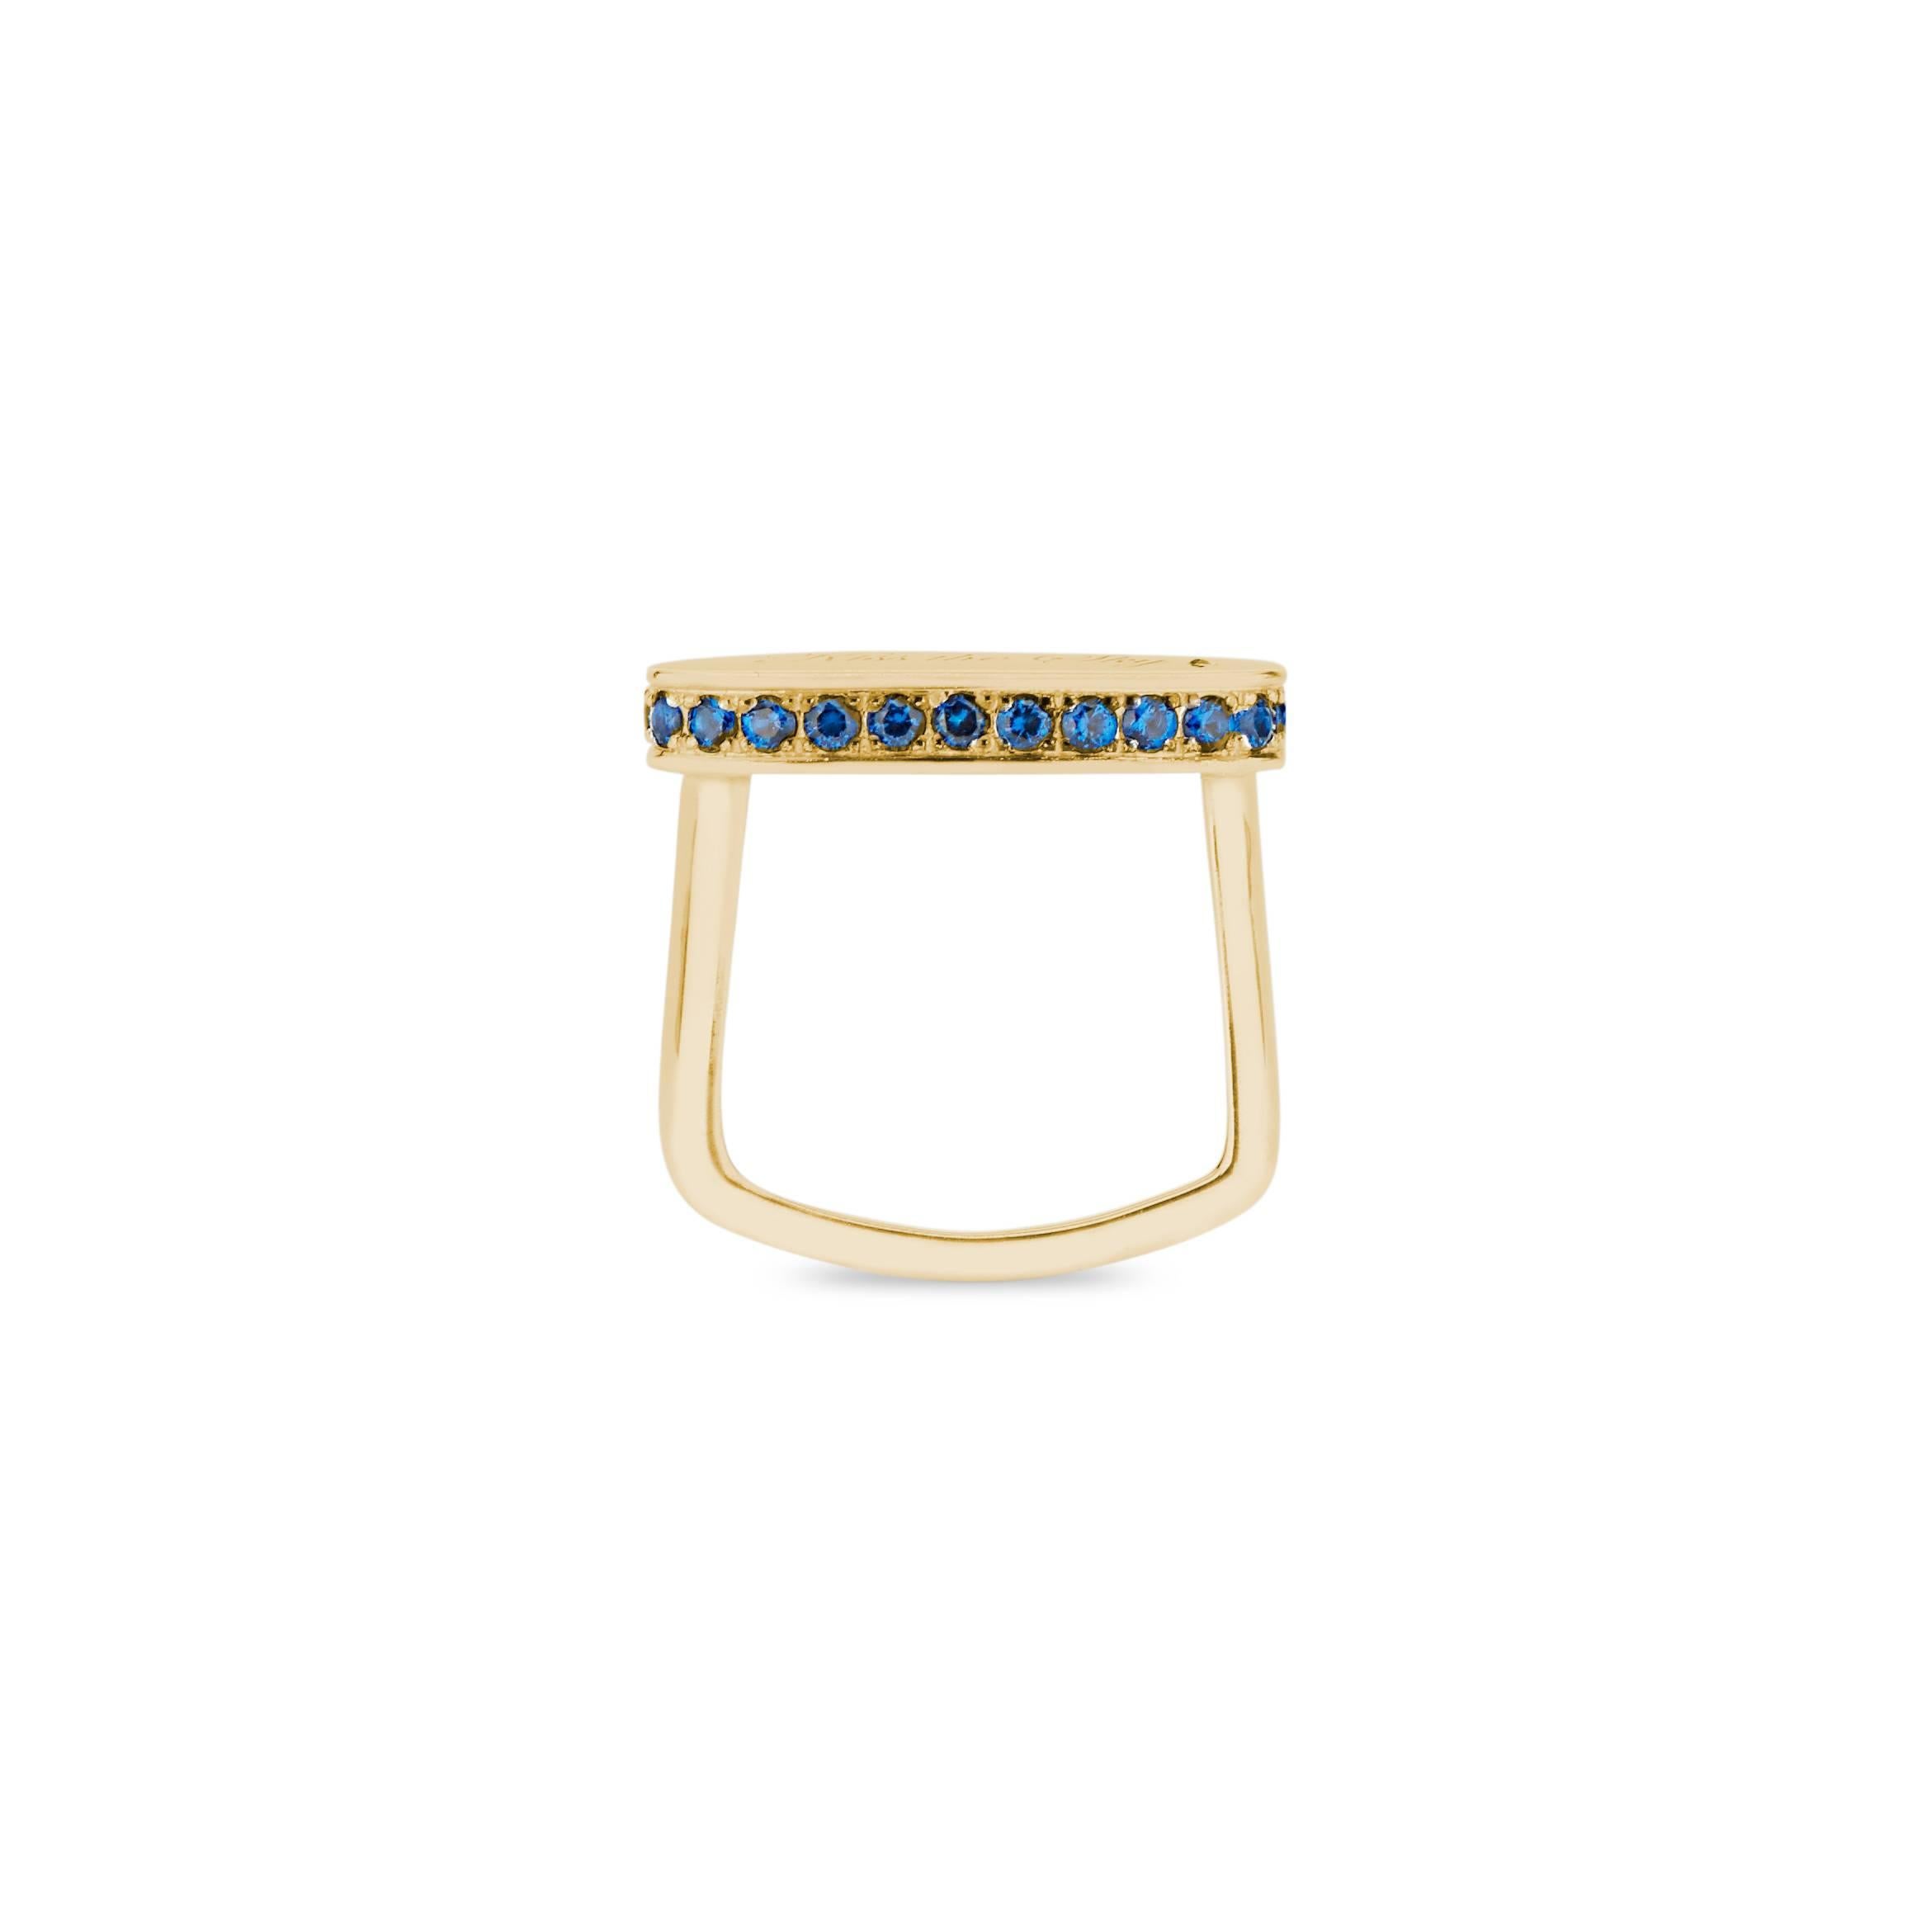 The 14k gold and blue sapphire signet ring is engraved with 